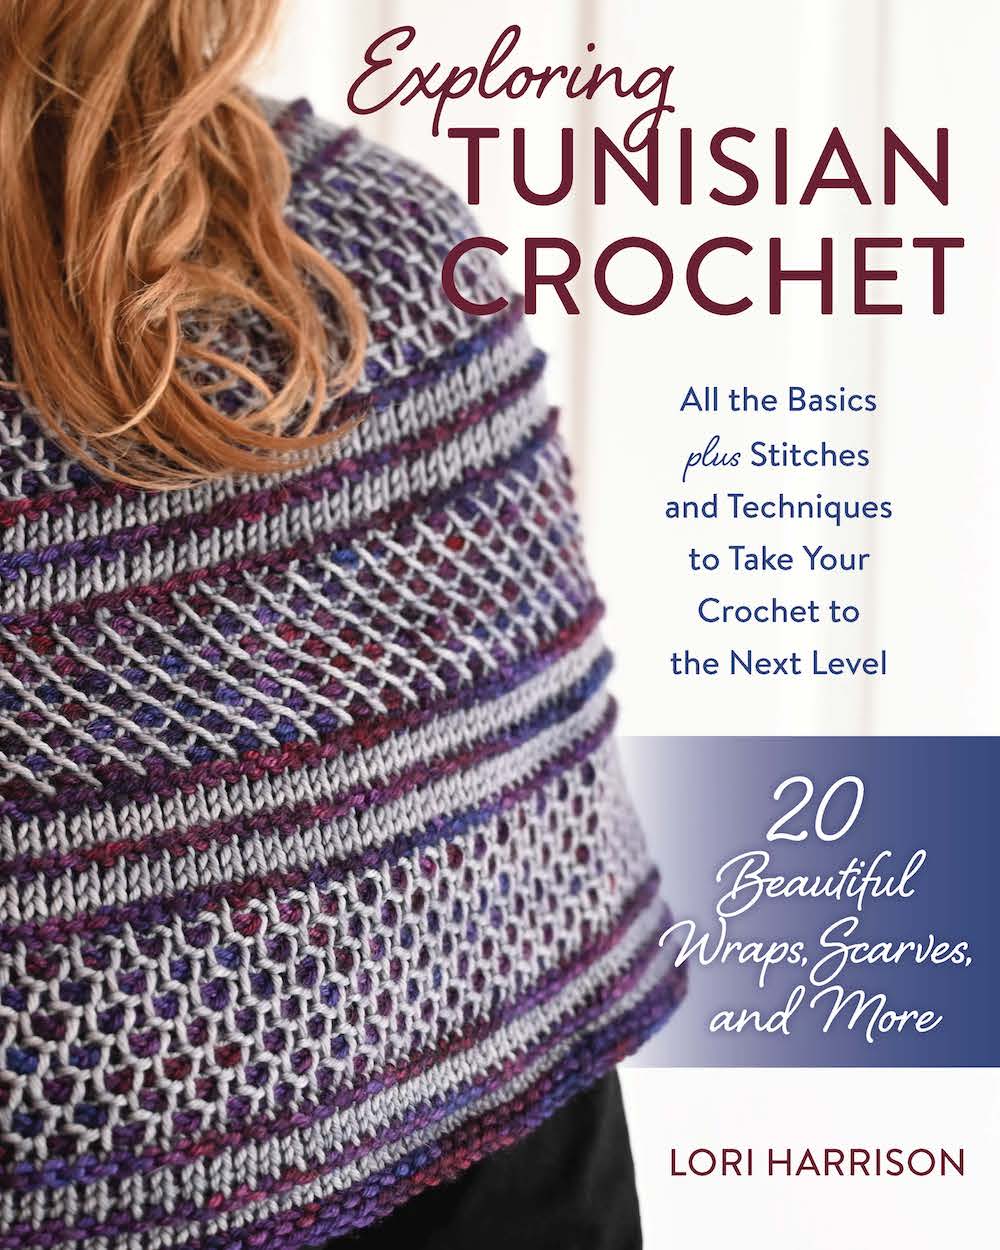 FREE Tunisian Crochet Patterns & Beginner Step-By-Step Guide